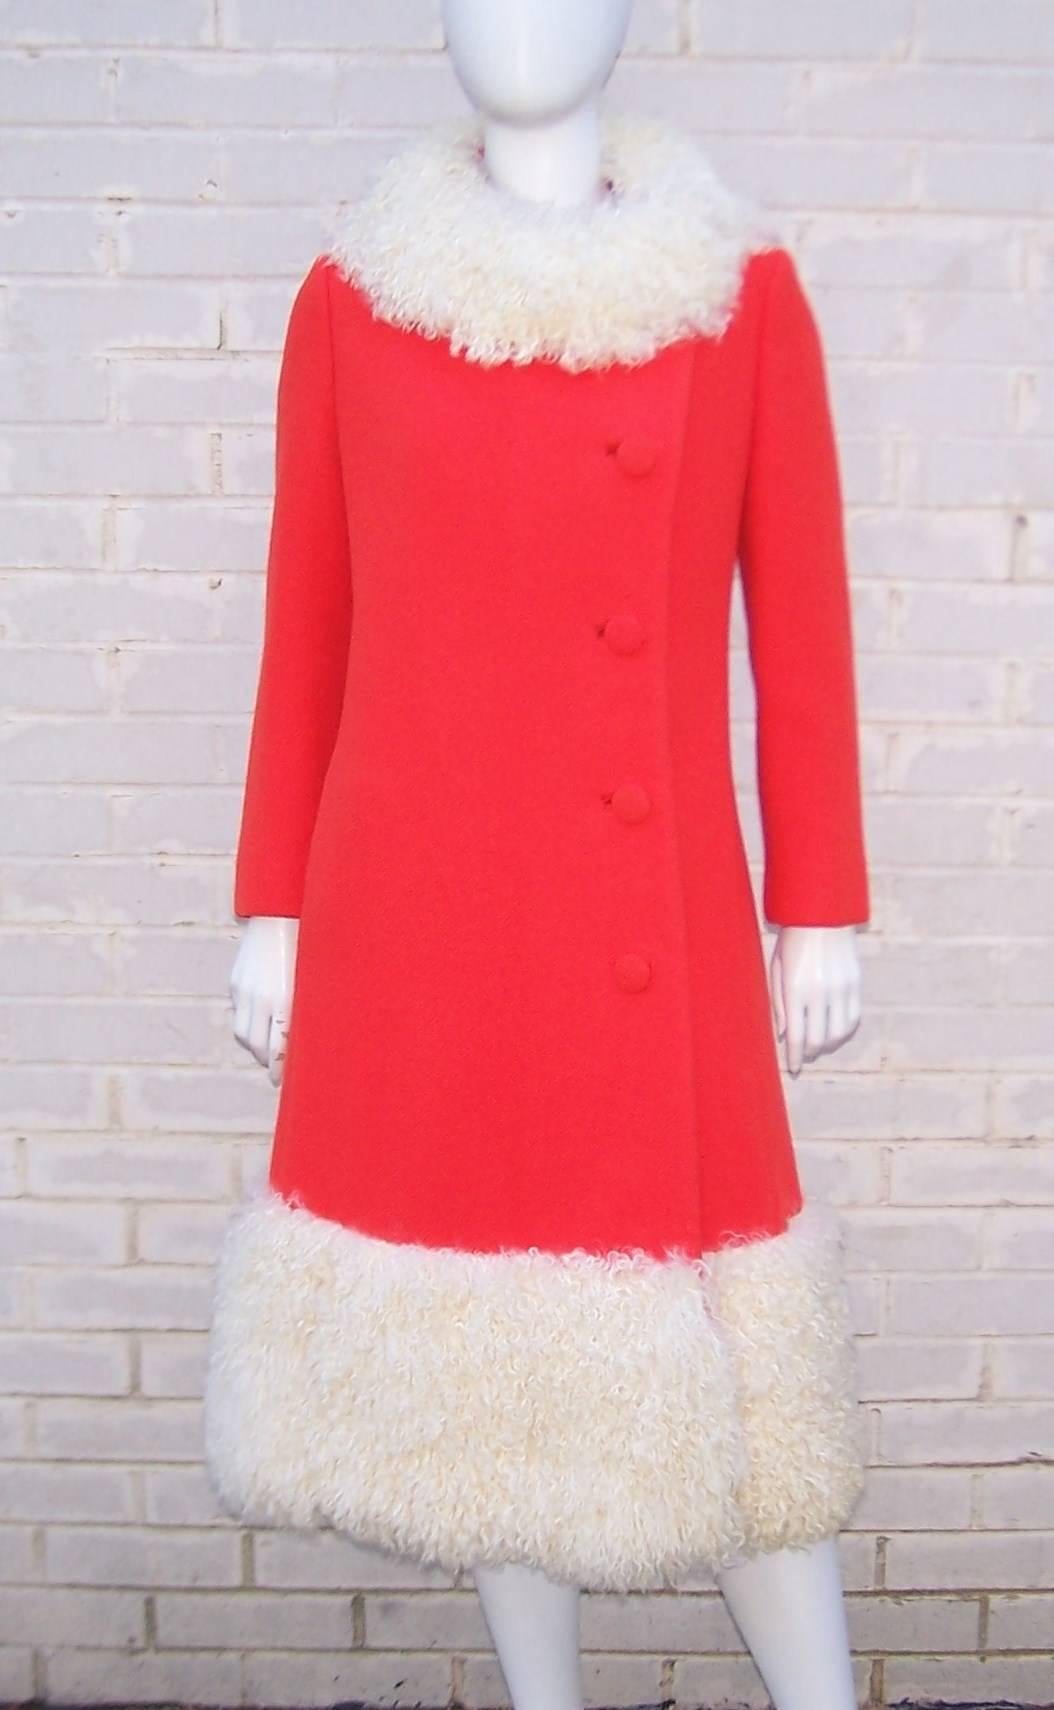 Wowza!  They'll see you coming and going in this eye popping Lilli Ann design.  From the artistic direction of Adolph Schuman for his company Lilli Ann, this neon red wool coat has all the style of the 1960's with functionality for a modern